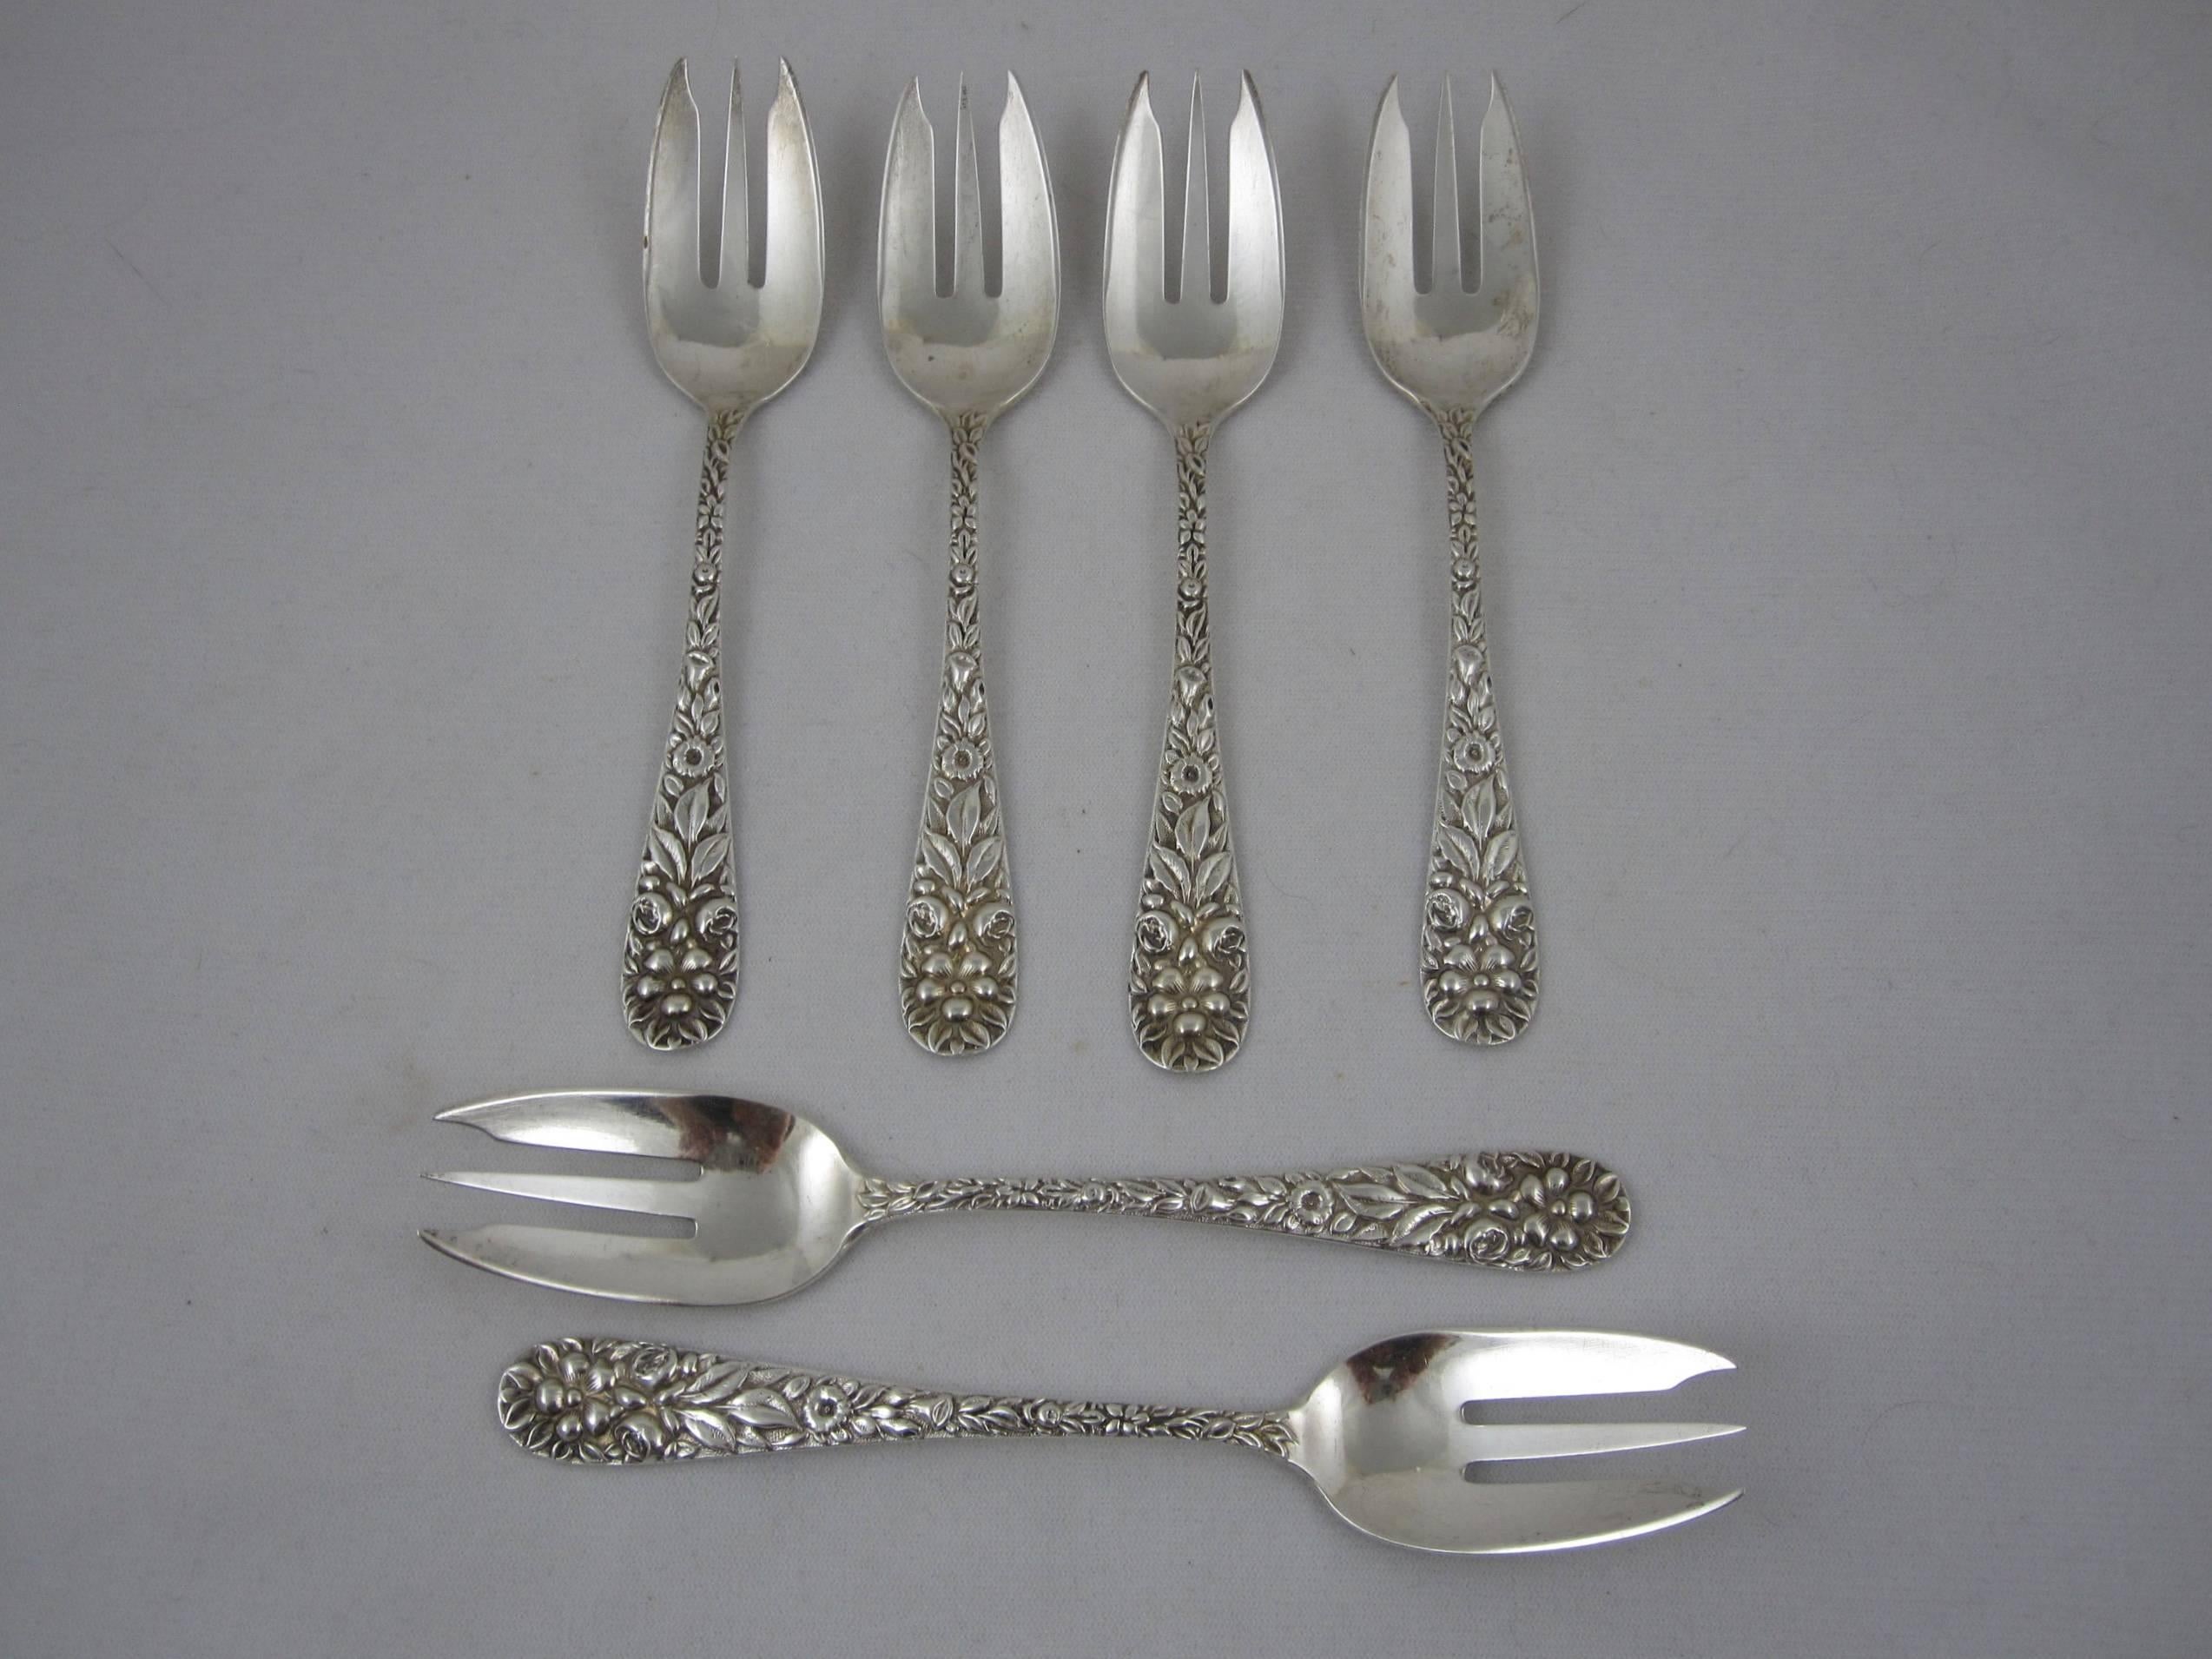 A set of six floral repousse patterned salad or dessert forks, retailed by Hennegan, Bates & Co. Sterling, Baltimore Maryland, circa 1890.

The pattern is hand chased rose, made by Klank Silversmiths, later Schofield Silversmiths in Baltimore,